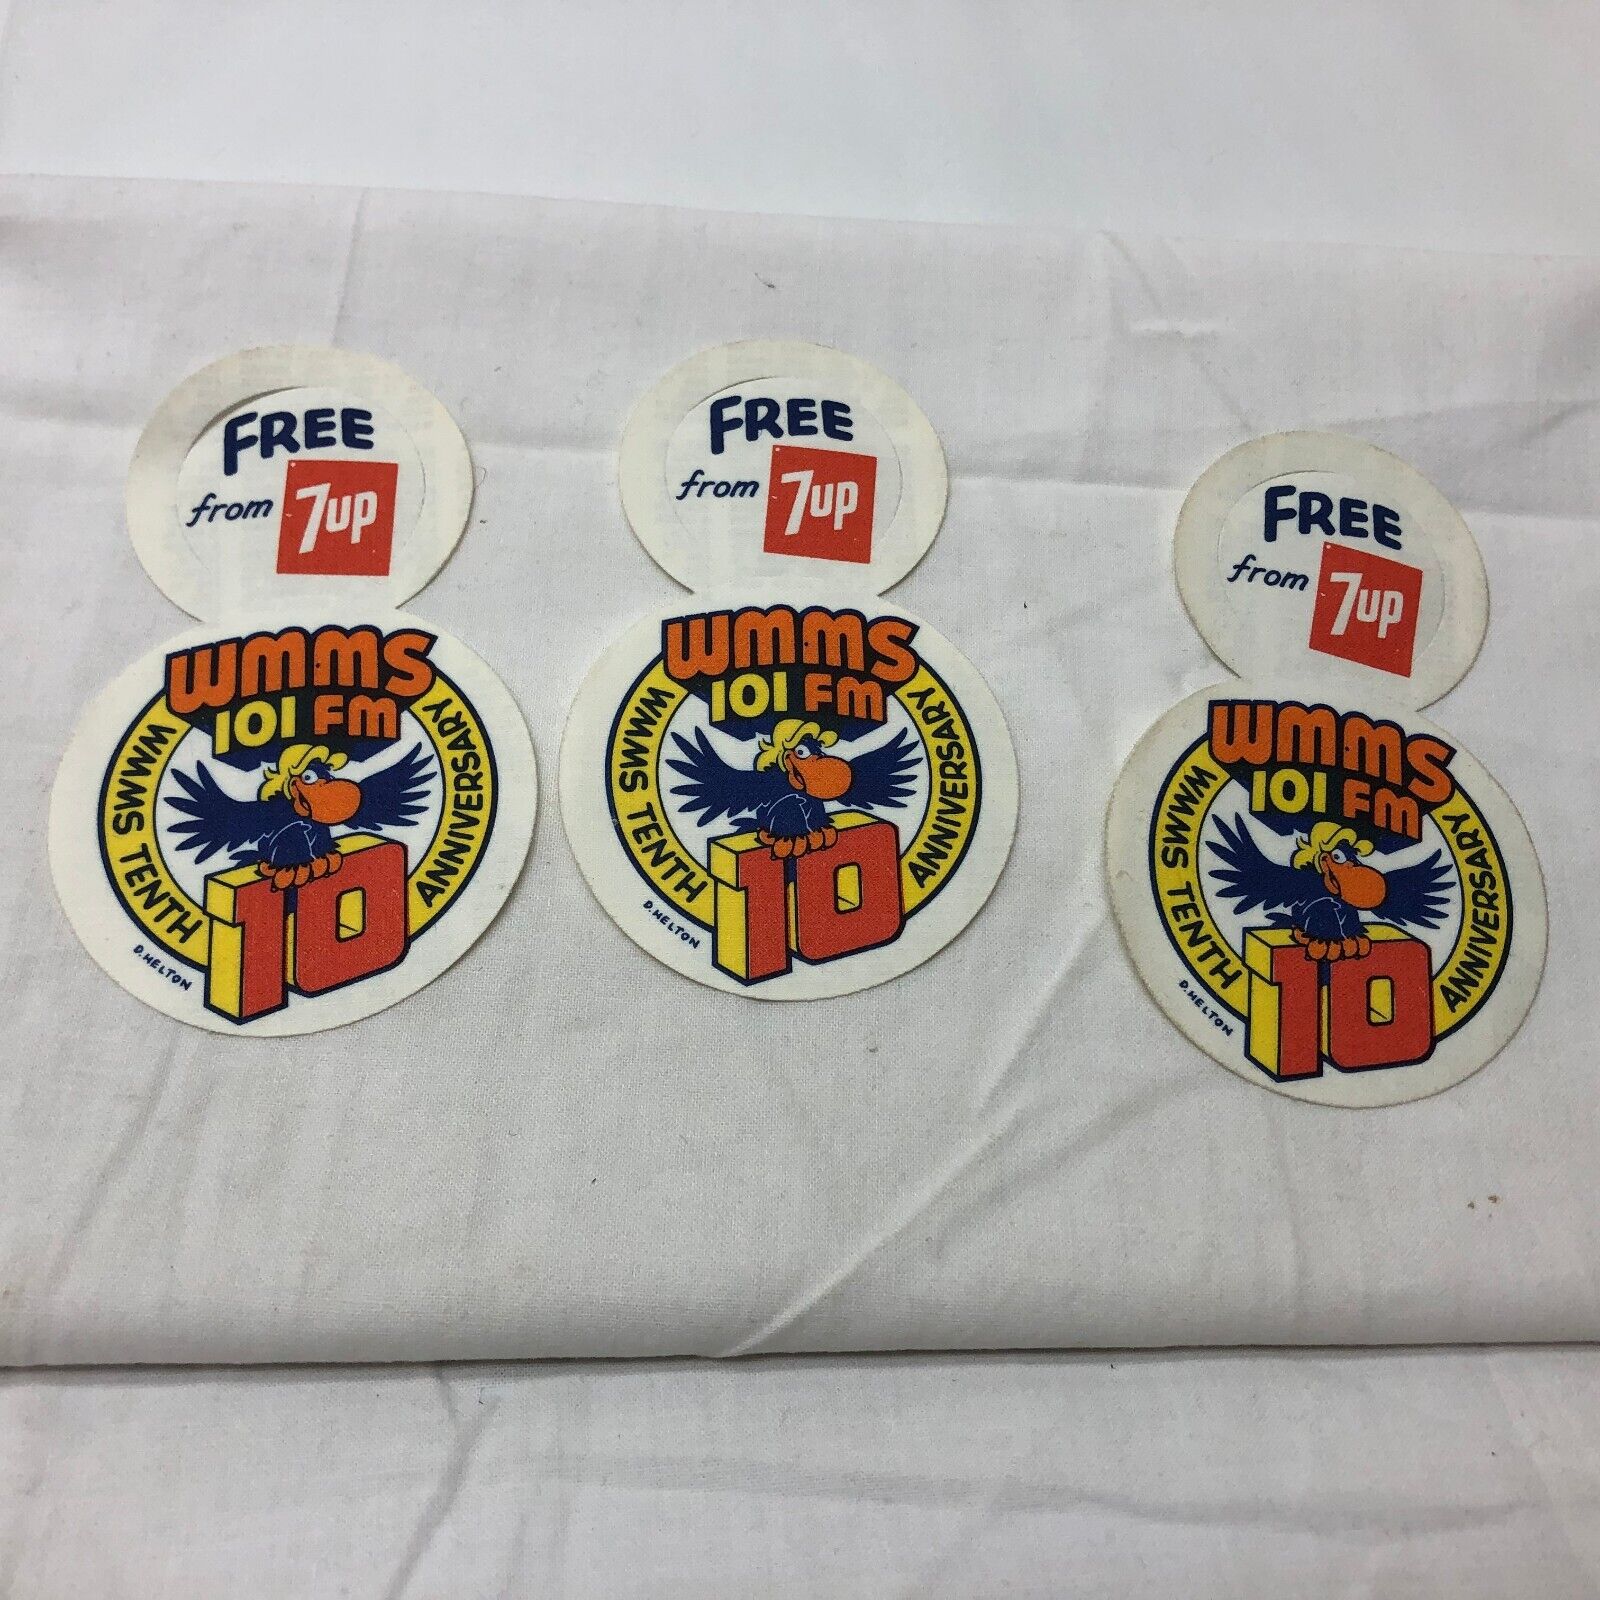 3 Vintage 1978 WMMS 101 FM Radio Station Patch Cleveland Ohio Advertising 7up